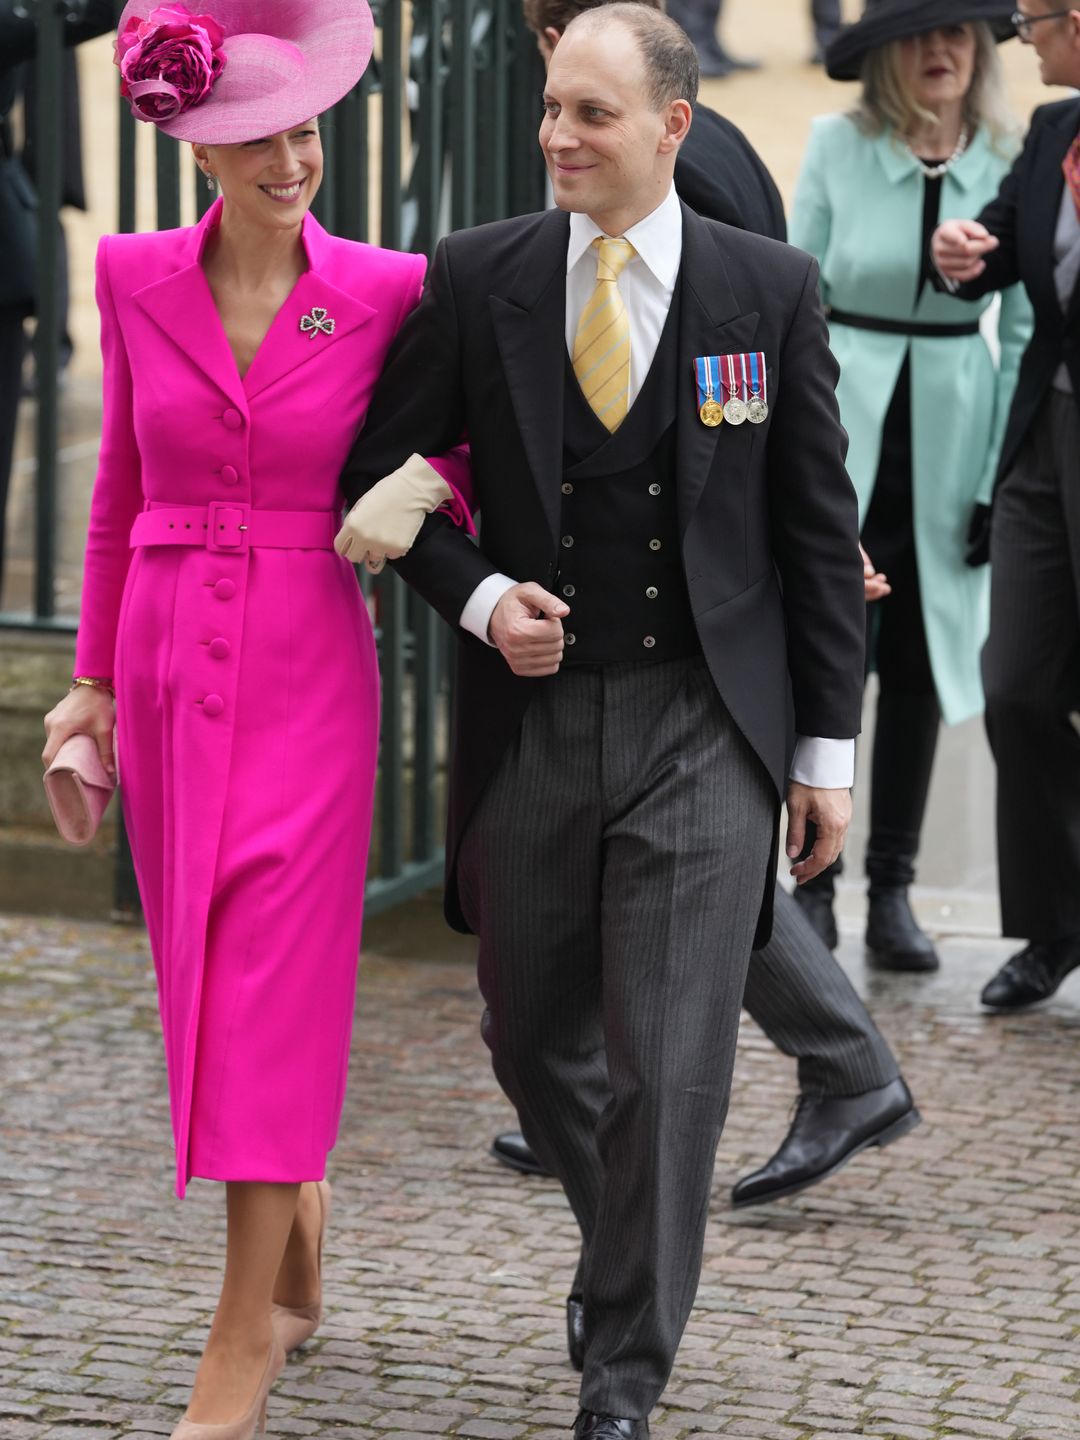 Lady Gabriella Kingston and Lord Frederick Windsor arriving ahead of the Coronation of King Charles III and Queen Camilla